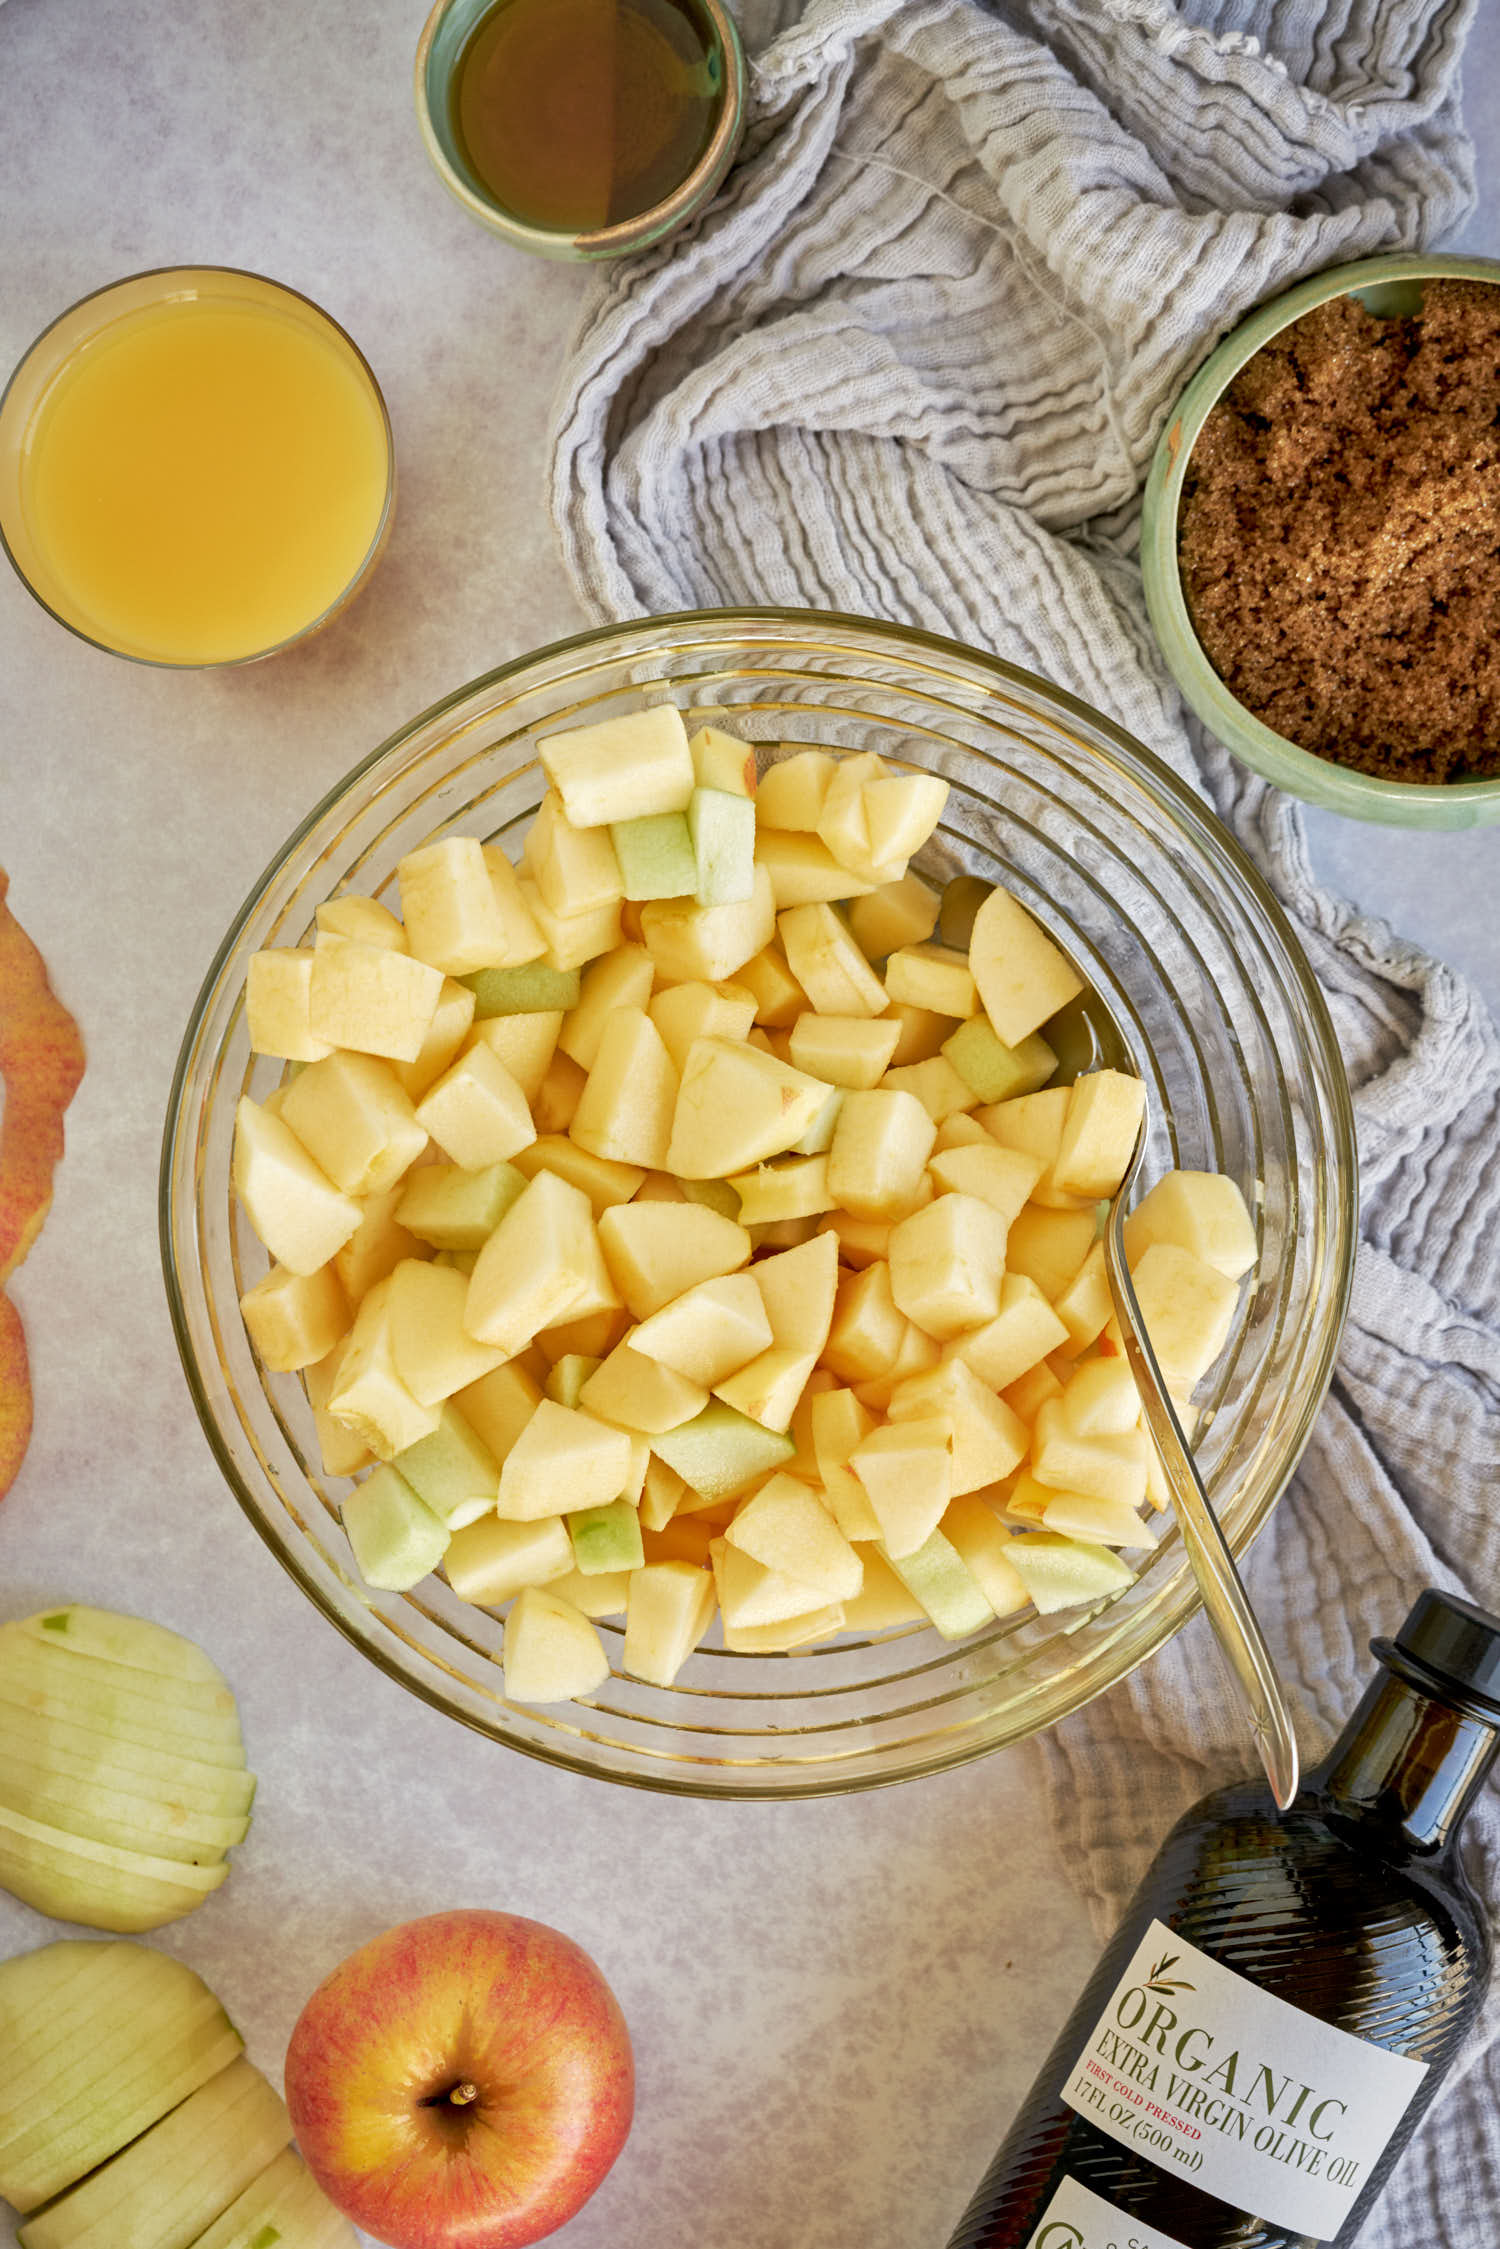 Chopped apples in a mixing bowl surrounded by ingredients.